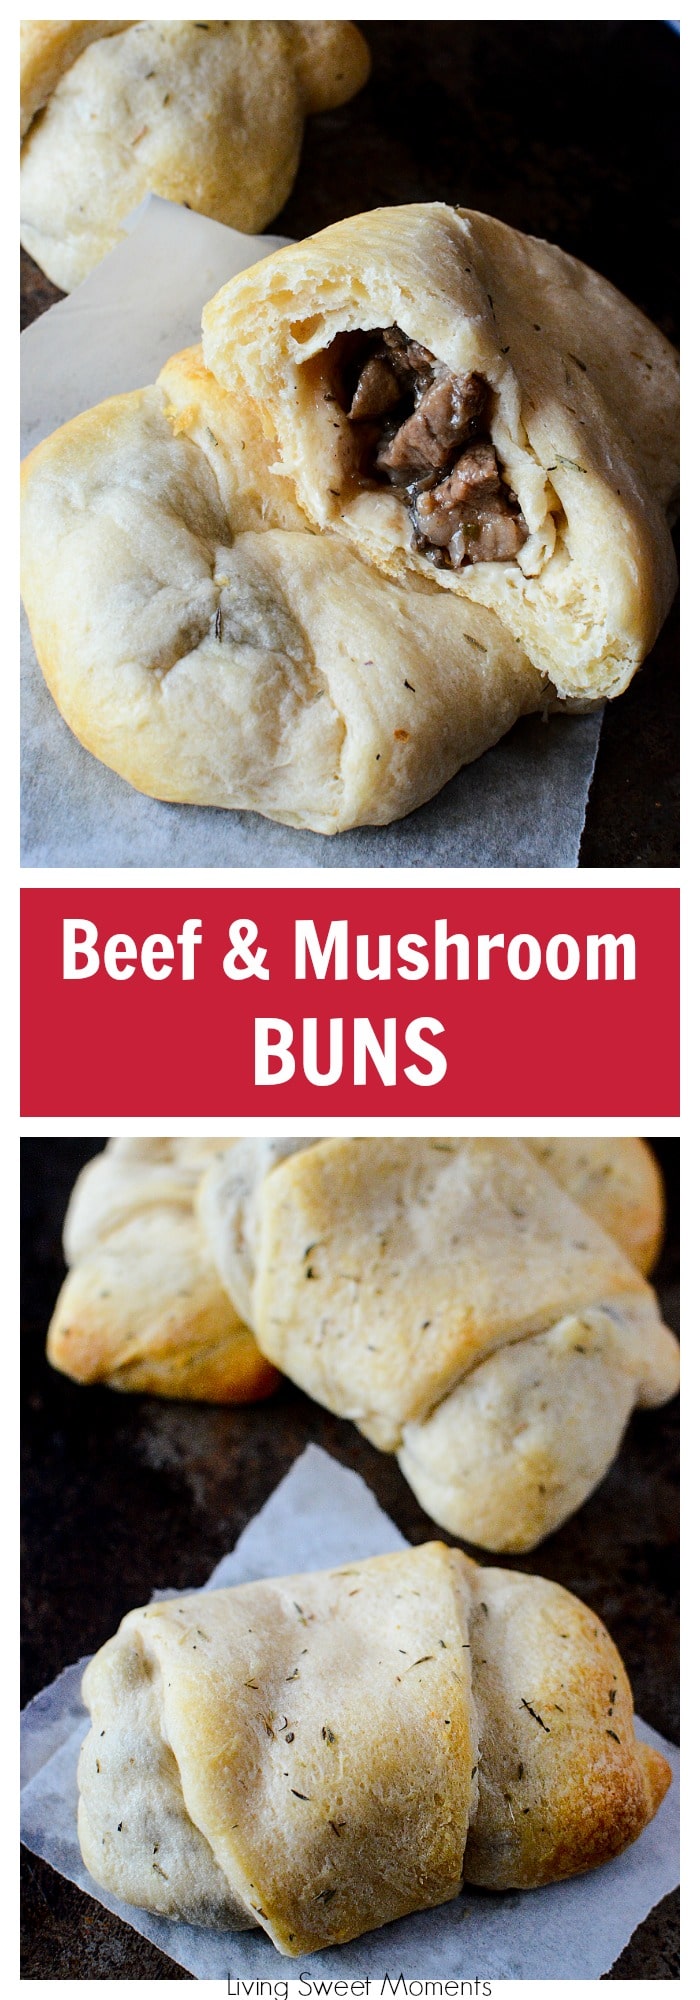 This delectable Mushroom Pork Buns recipe is excellent easy to originate and is absorbing in Half-hour or much less. The correct like a flash weeknight dinner belief for the family.   Rapid Mushroom Pork Buns beef and mushroom buns recipe pinterest